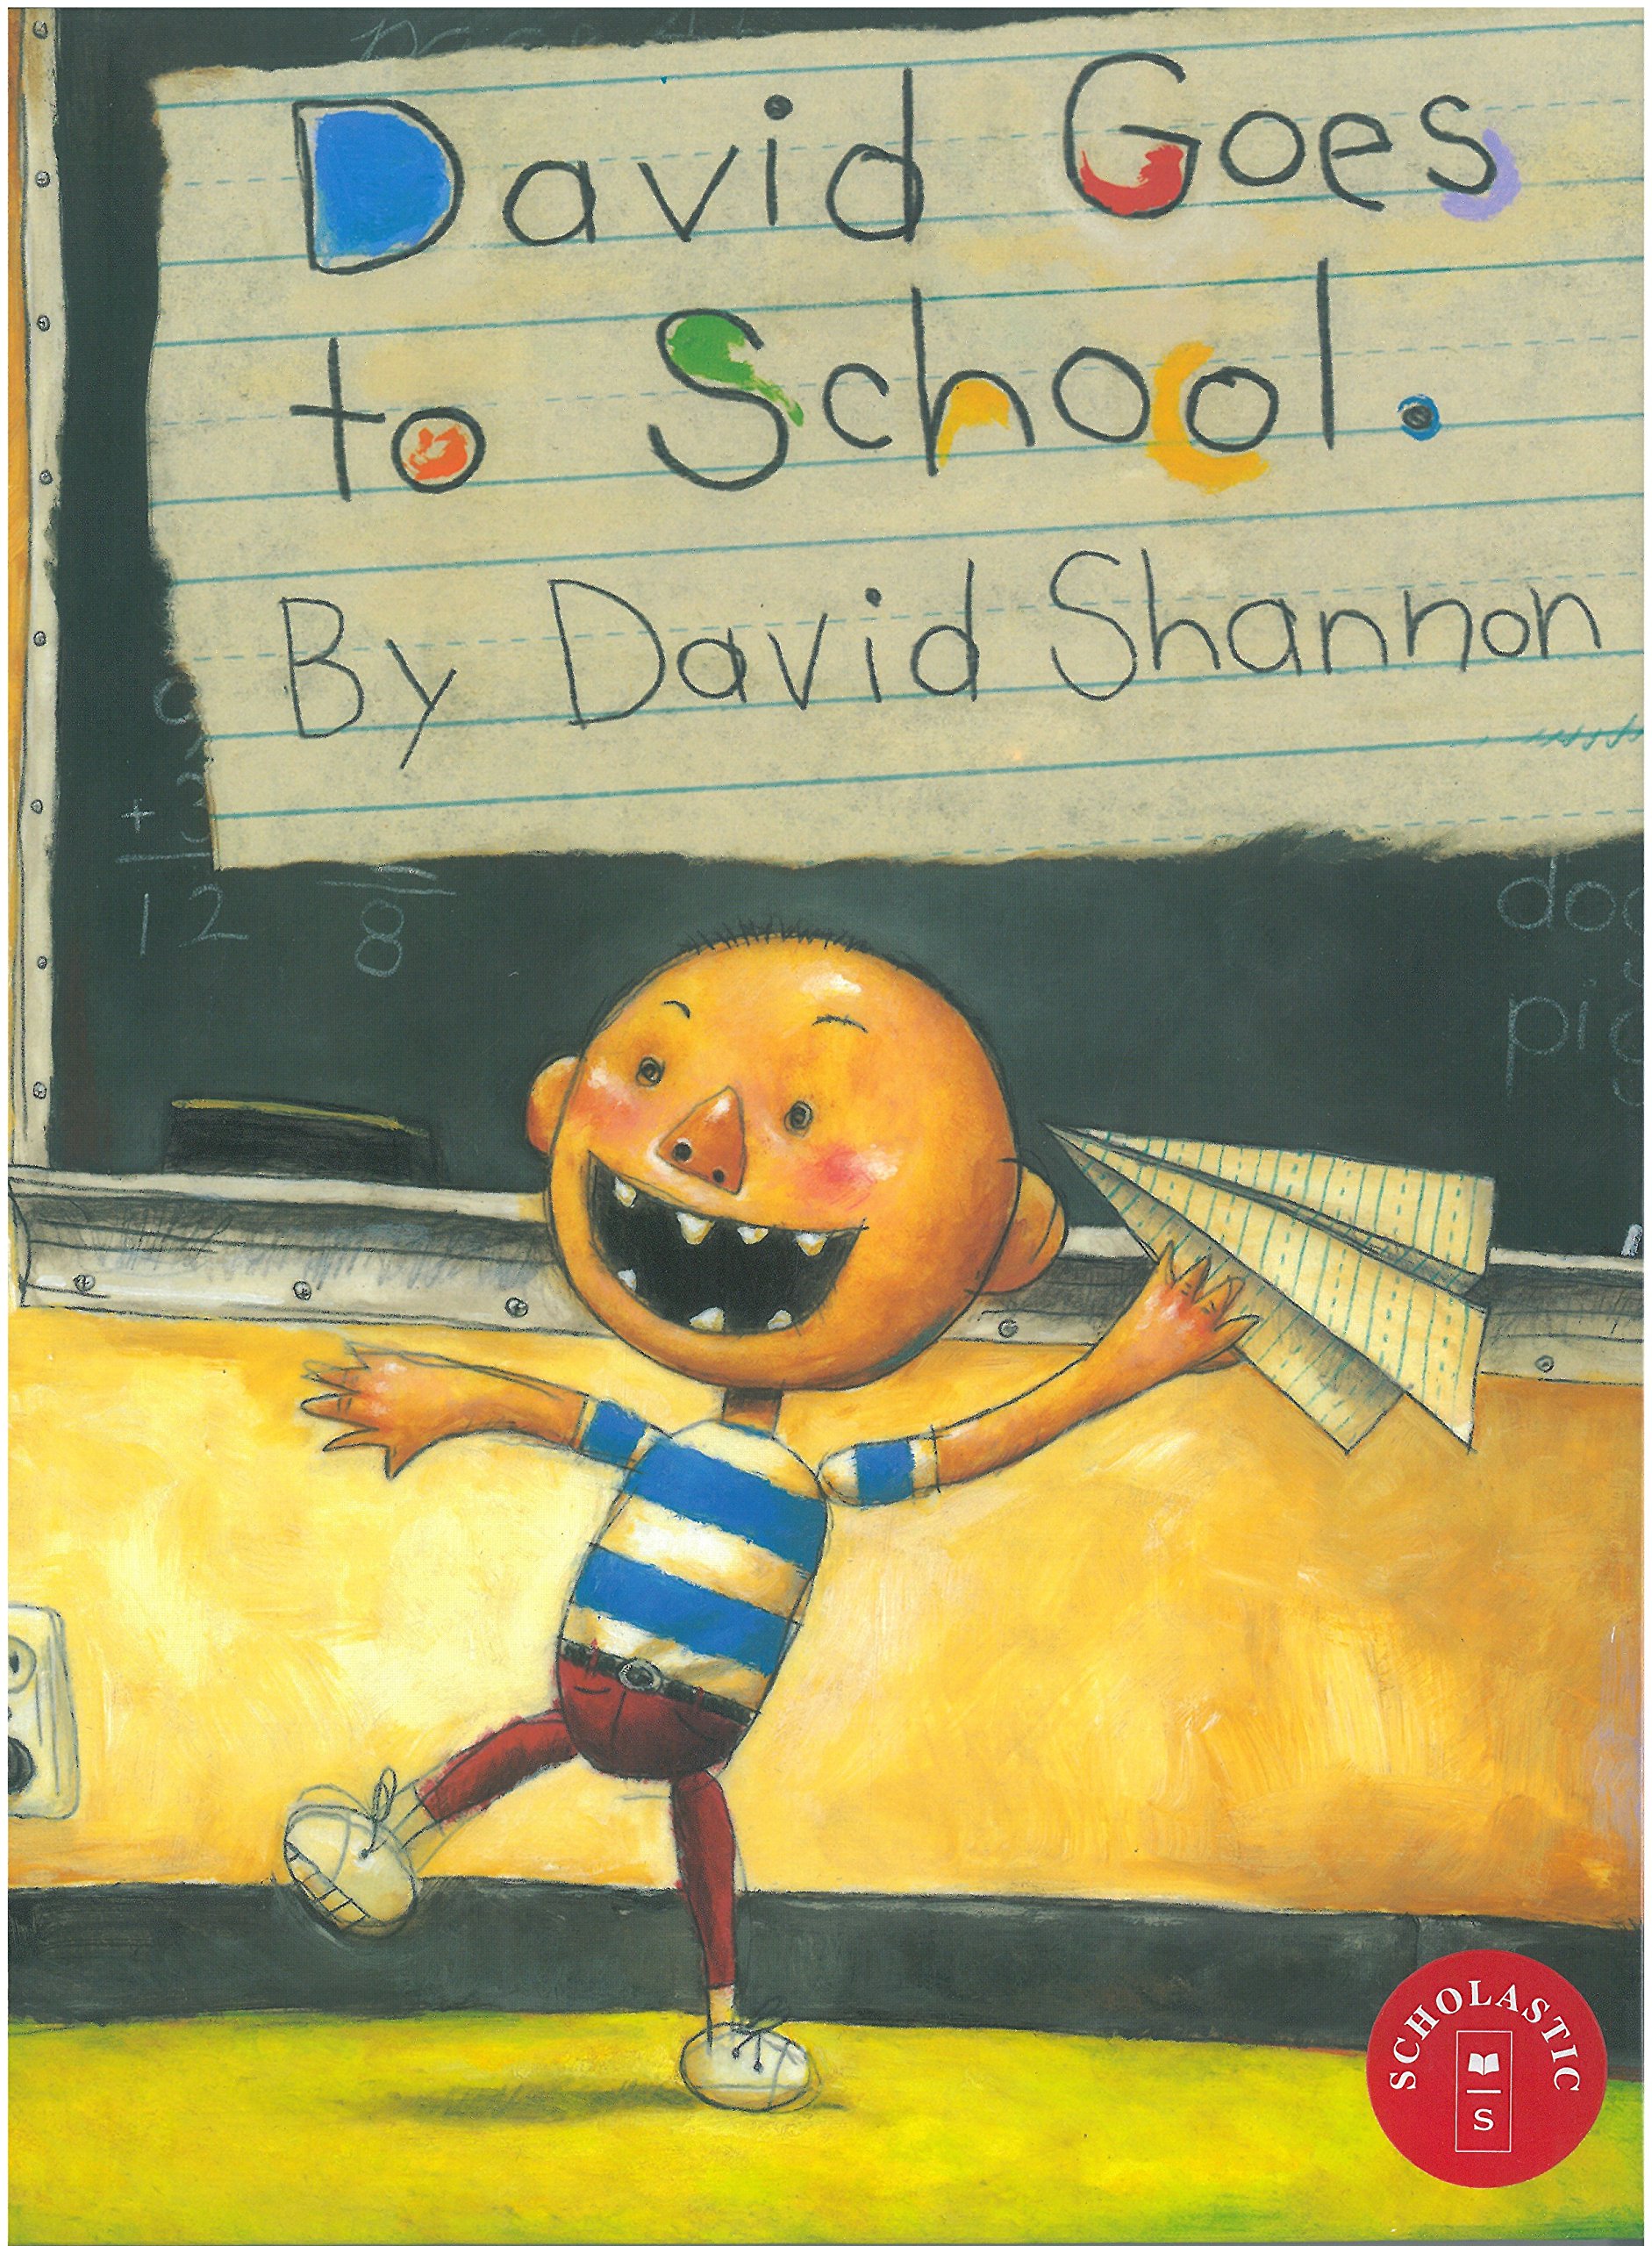 photo of the book "David goes to school"